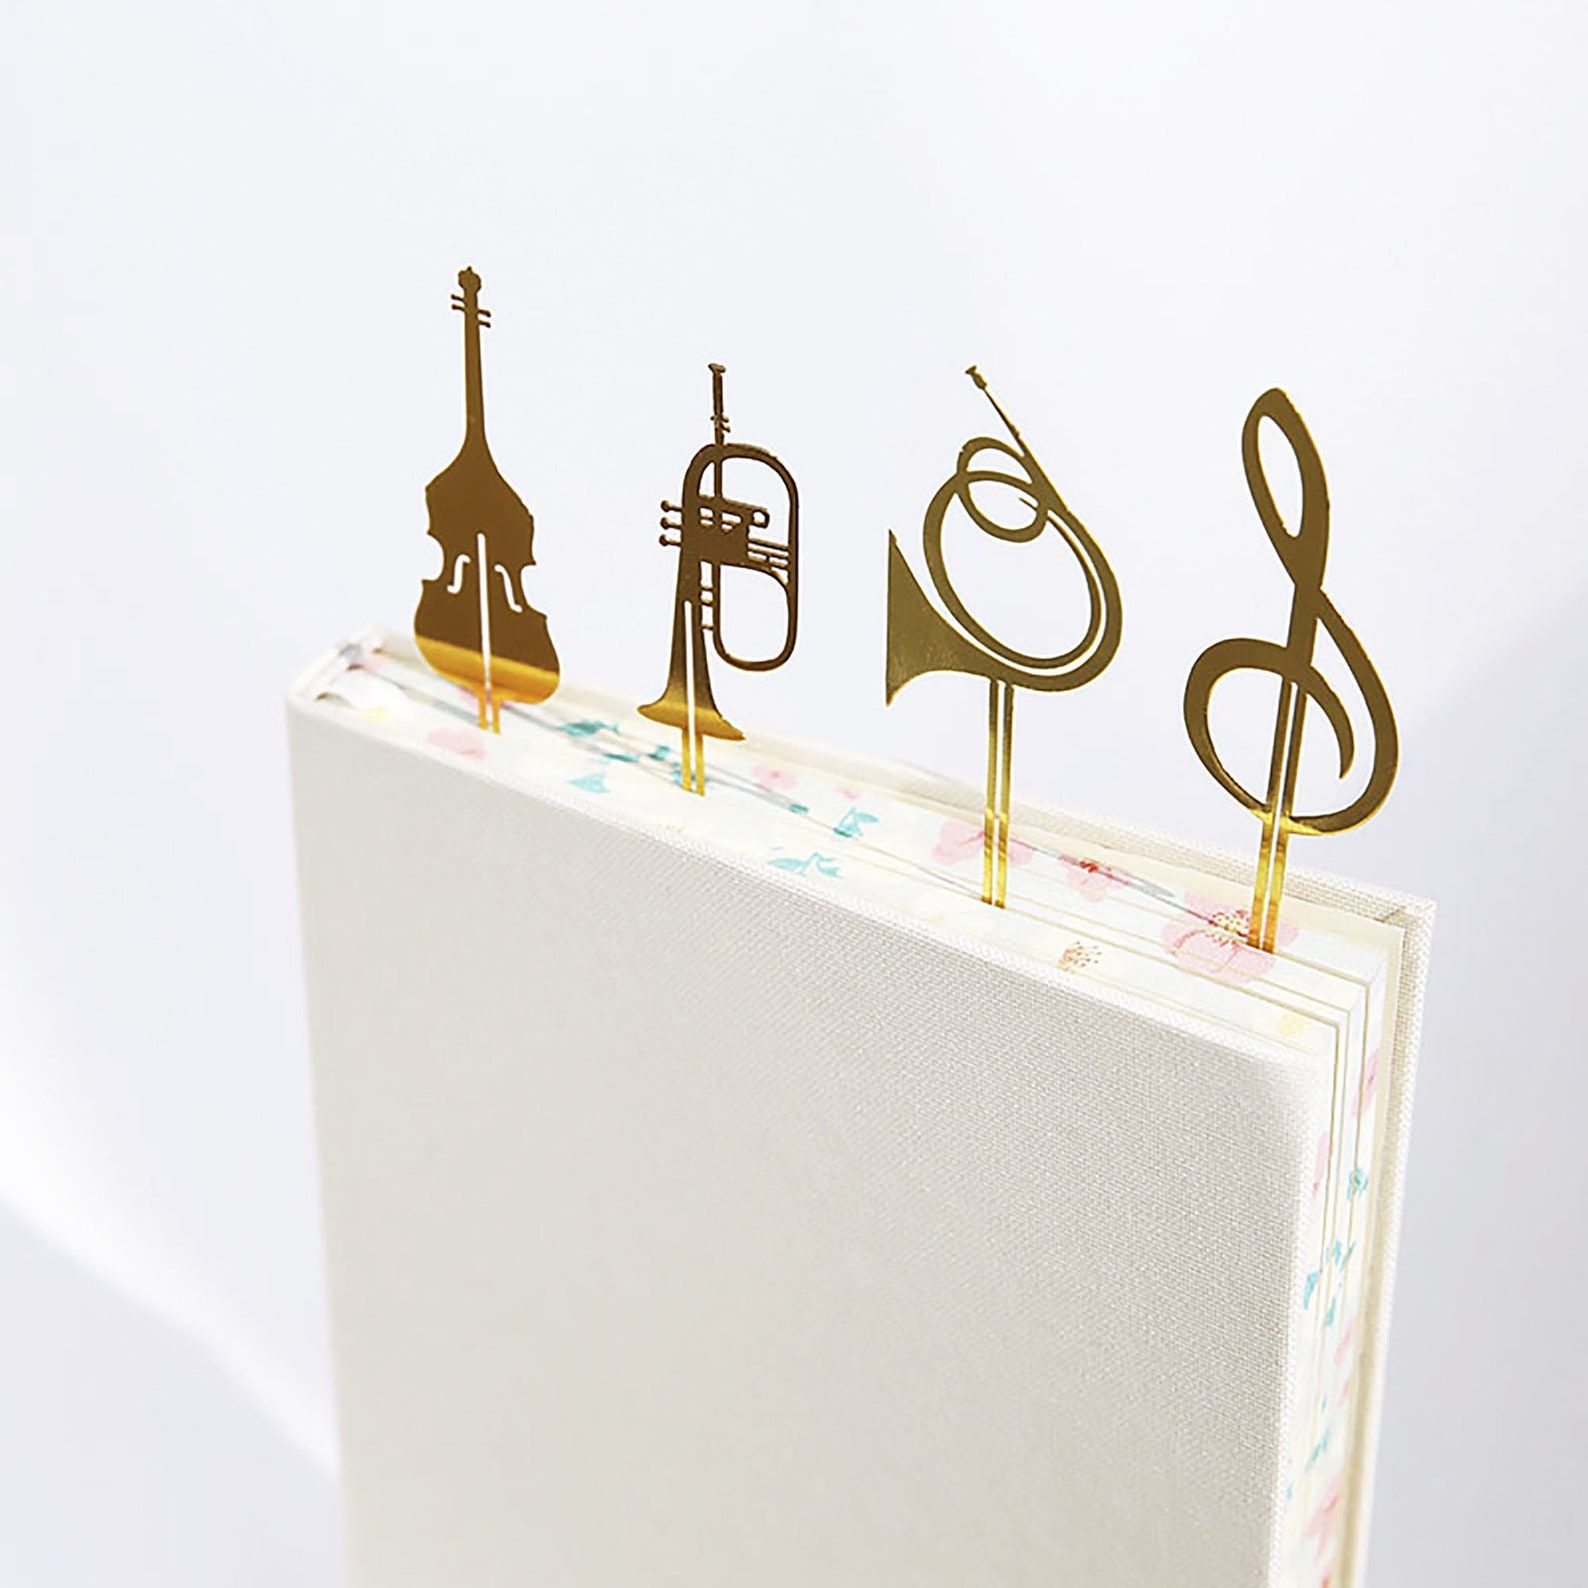 Image of four metal bookmarks, including a violin, trumpet, french horn, and treble clef, on top of a book. 